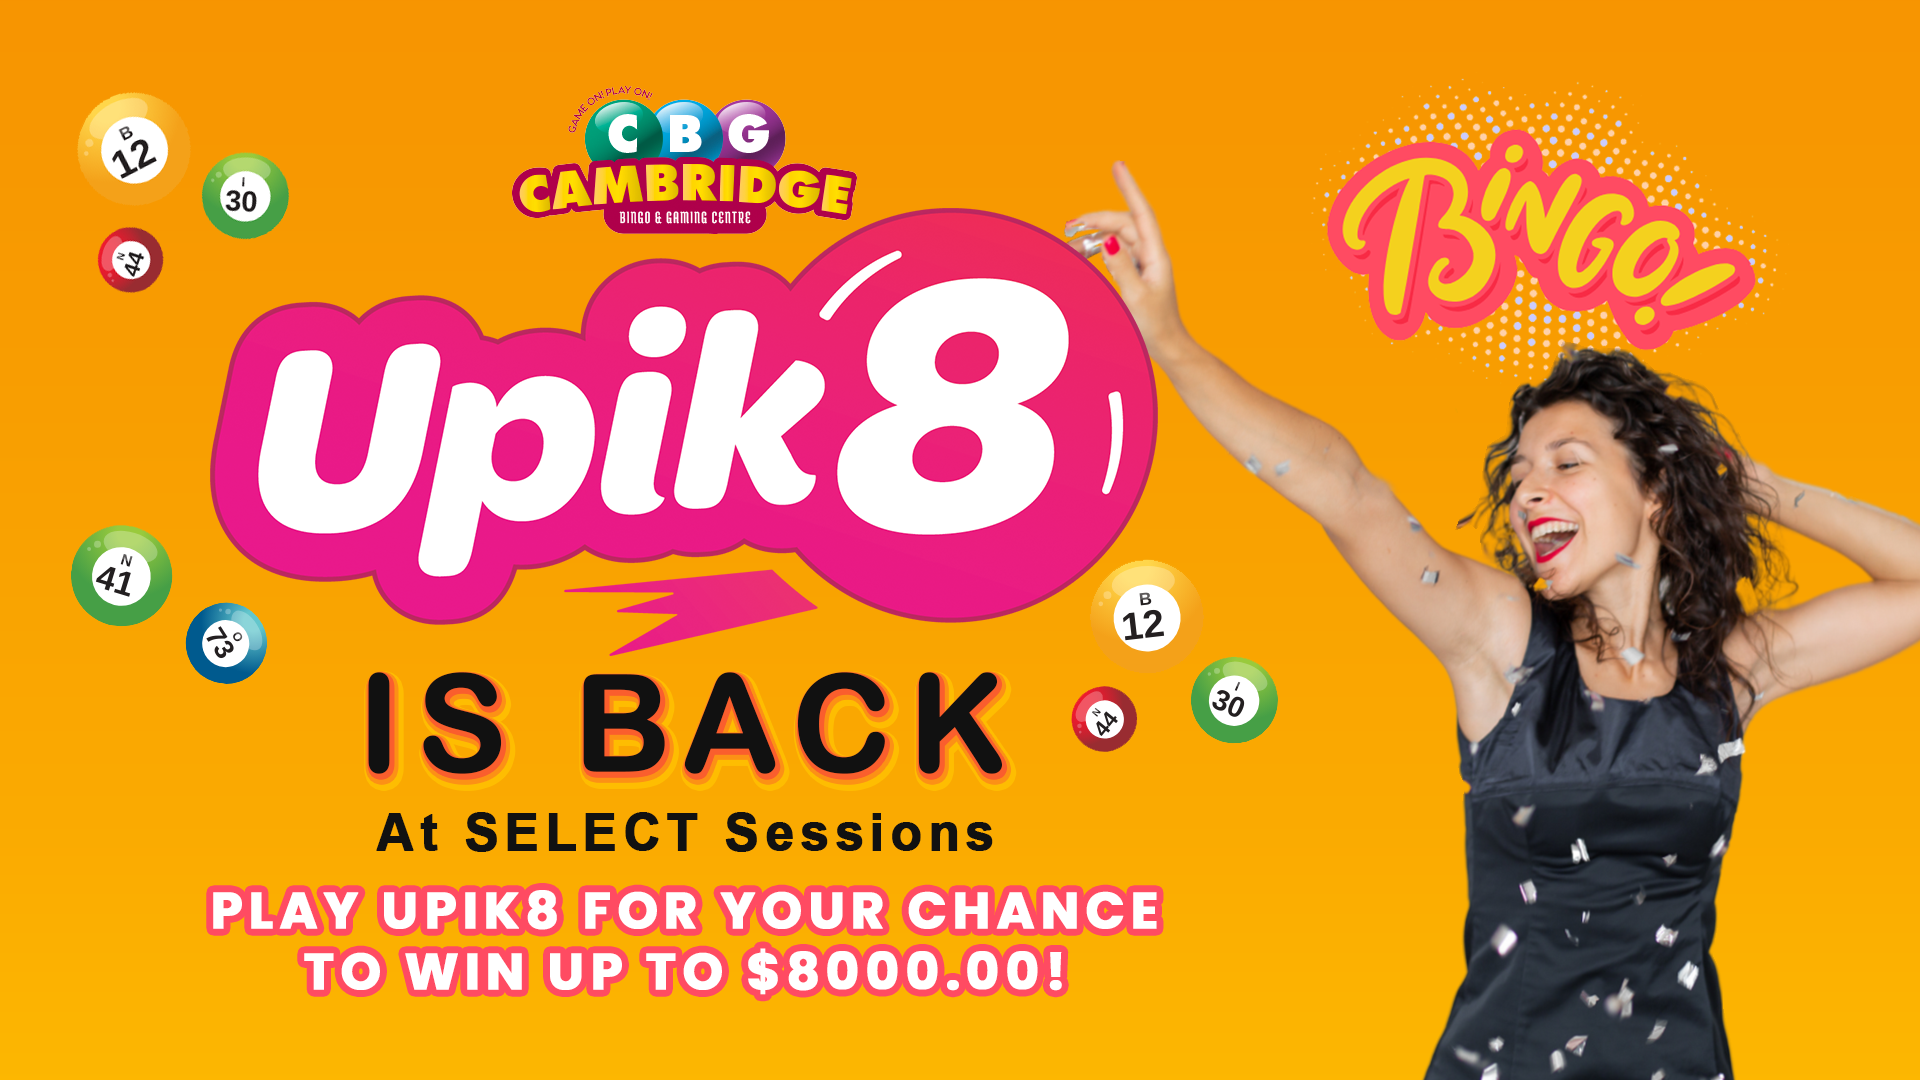 play Upik8 at select sessions to win up to $8,000.00